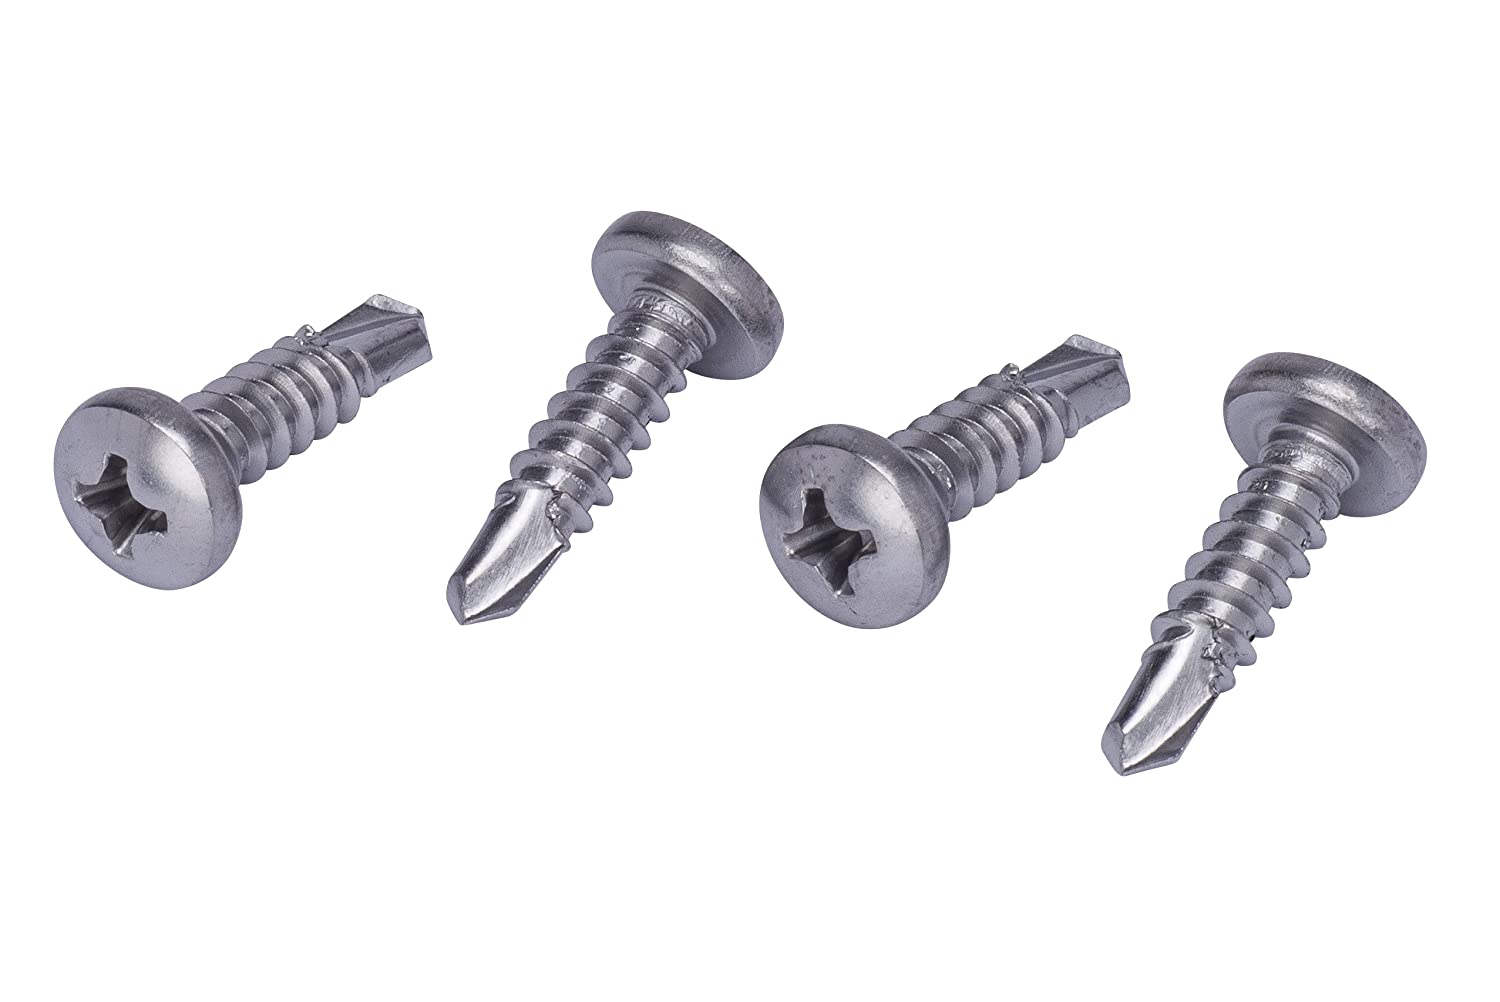 12 x 1" Self Tapping Stainless Steel Metal Screw, (100 Pack) Phillips Pan  Head Self Drilling Screws, 410 Stainless Steel, Choose Size, by Bolt  Dropper